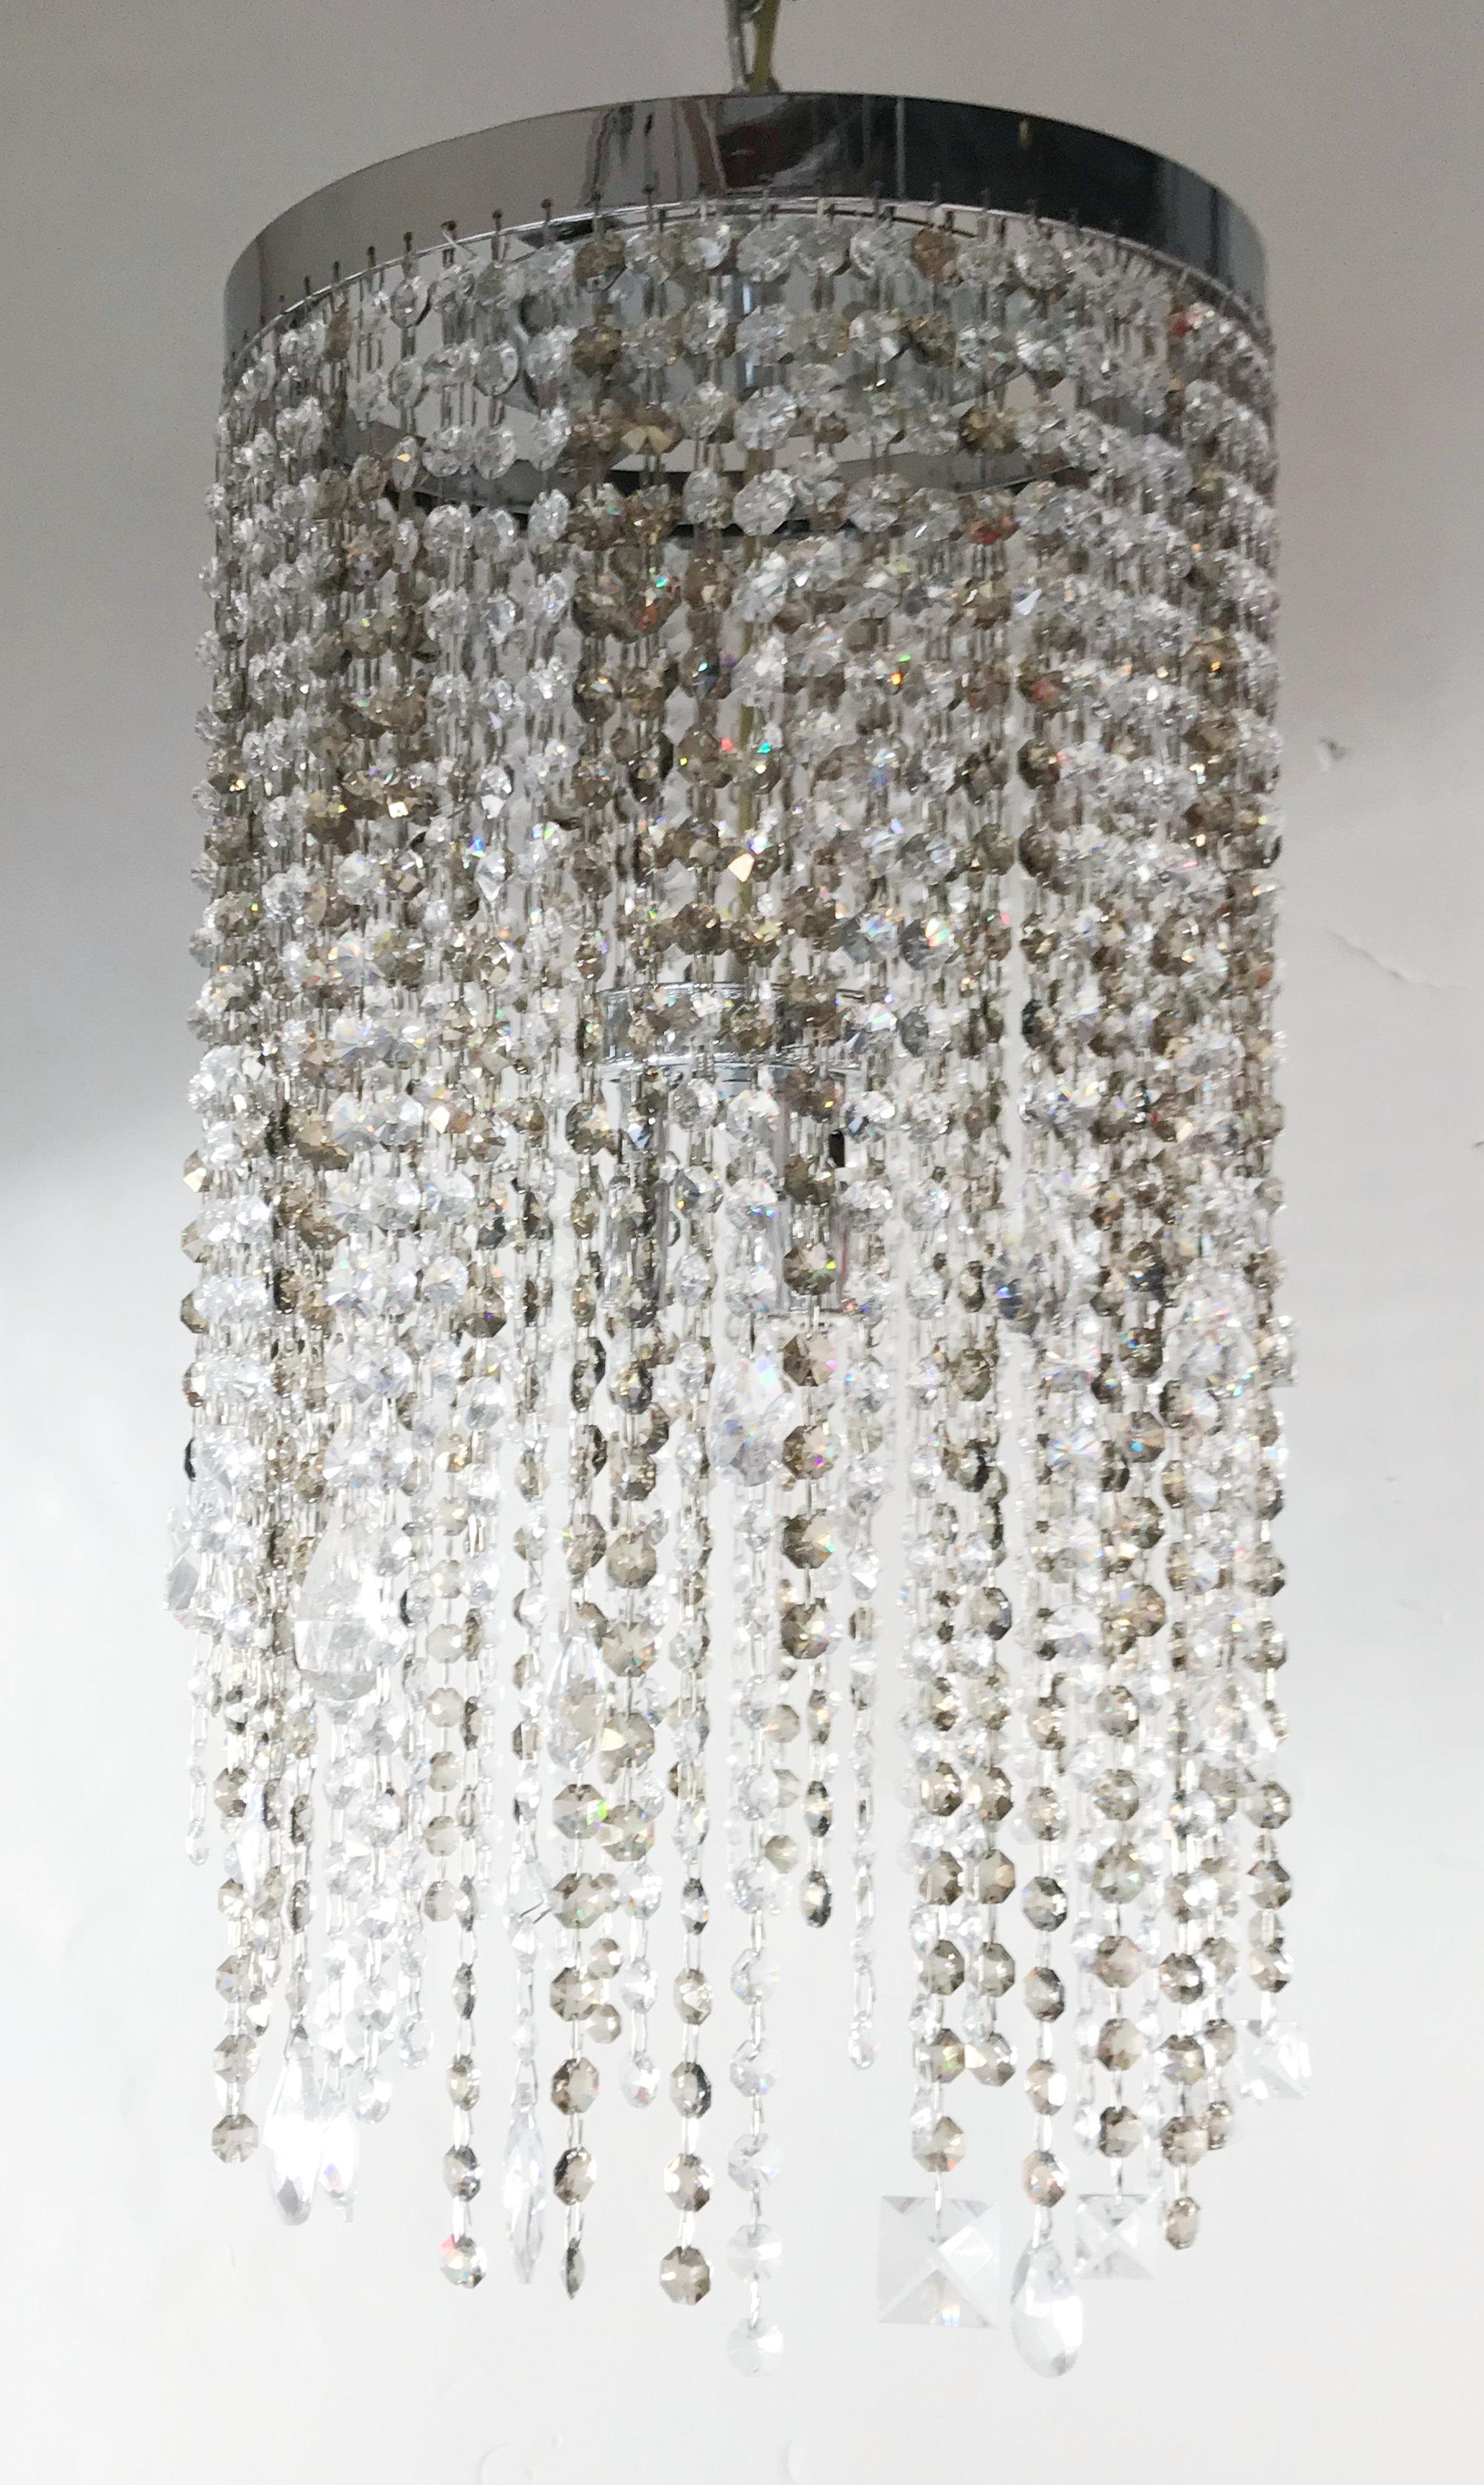 Elegant Italian flush mount with strings of smoky and clear octagonal Swarovski crystals mixed with other larger crystals in various shapes / Made in Italy
3 lights / G9 type / max 40W each
Diameter: 13.5 inches / Height: 23 inches
1 in stock in